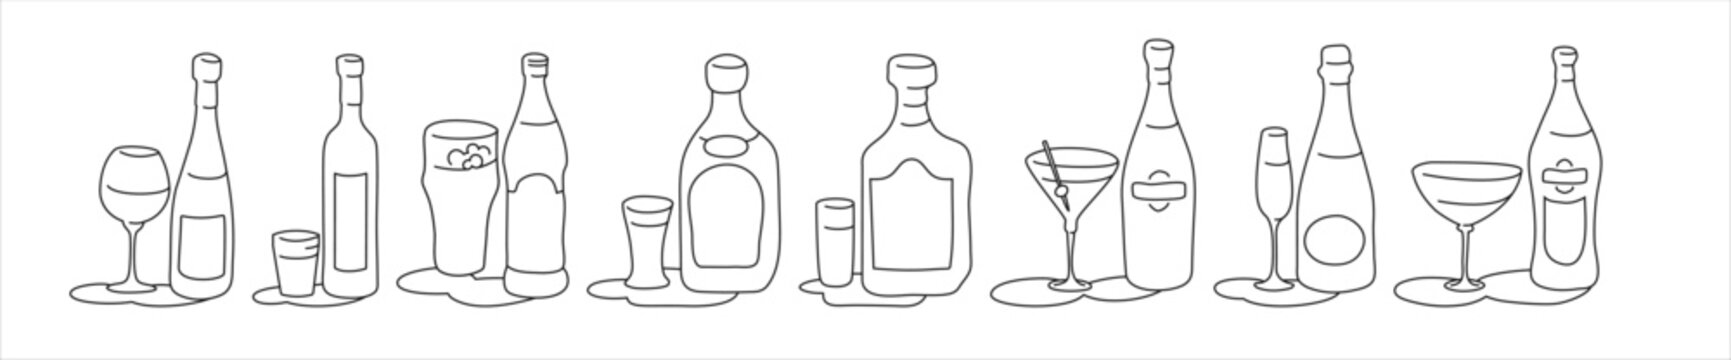 Wine vodka beer tequila rum martini champagne vermouth bottle and glass outline icon on white background. Black white cartoon sketch graphic design. Doodle style. Hand drawn image. Party drinks